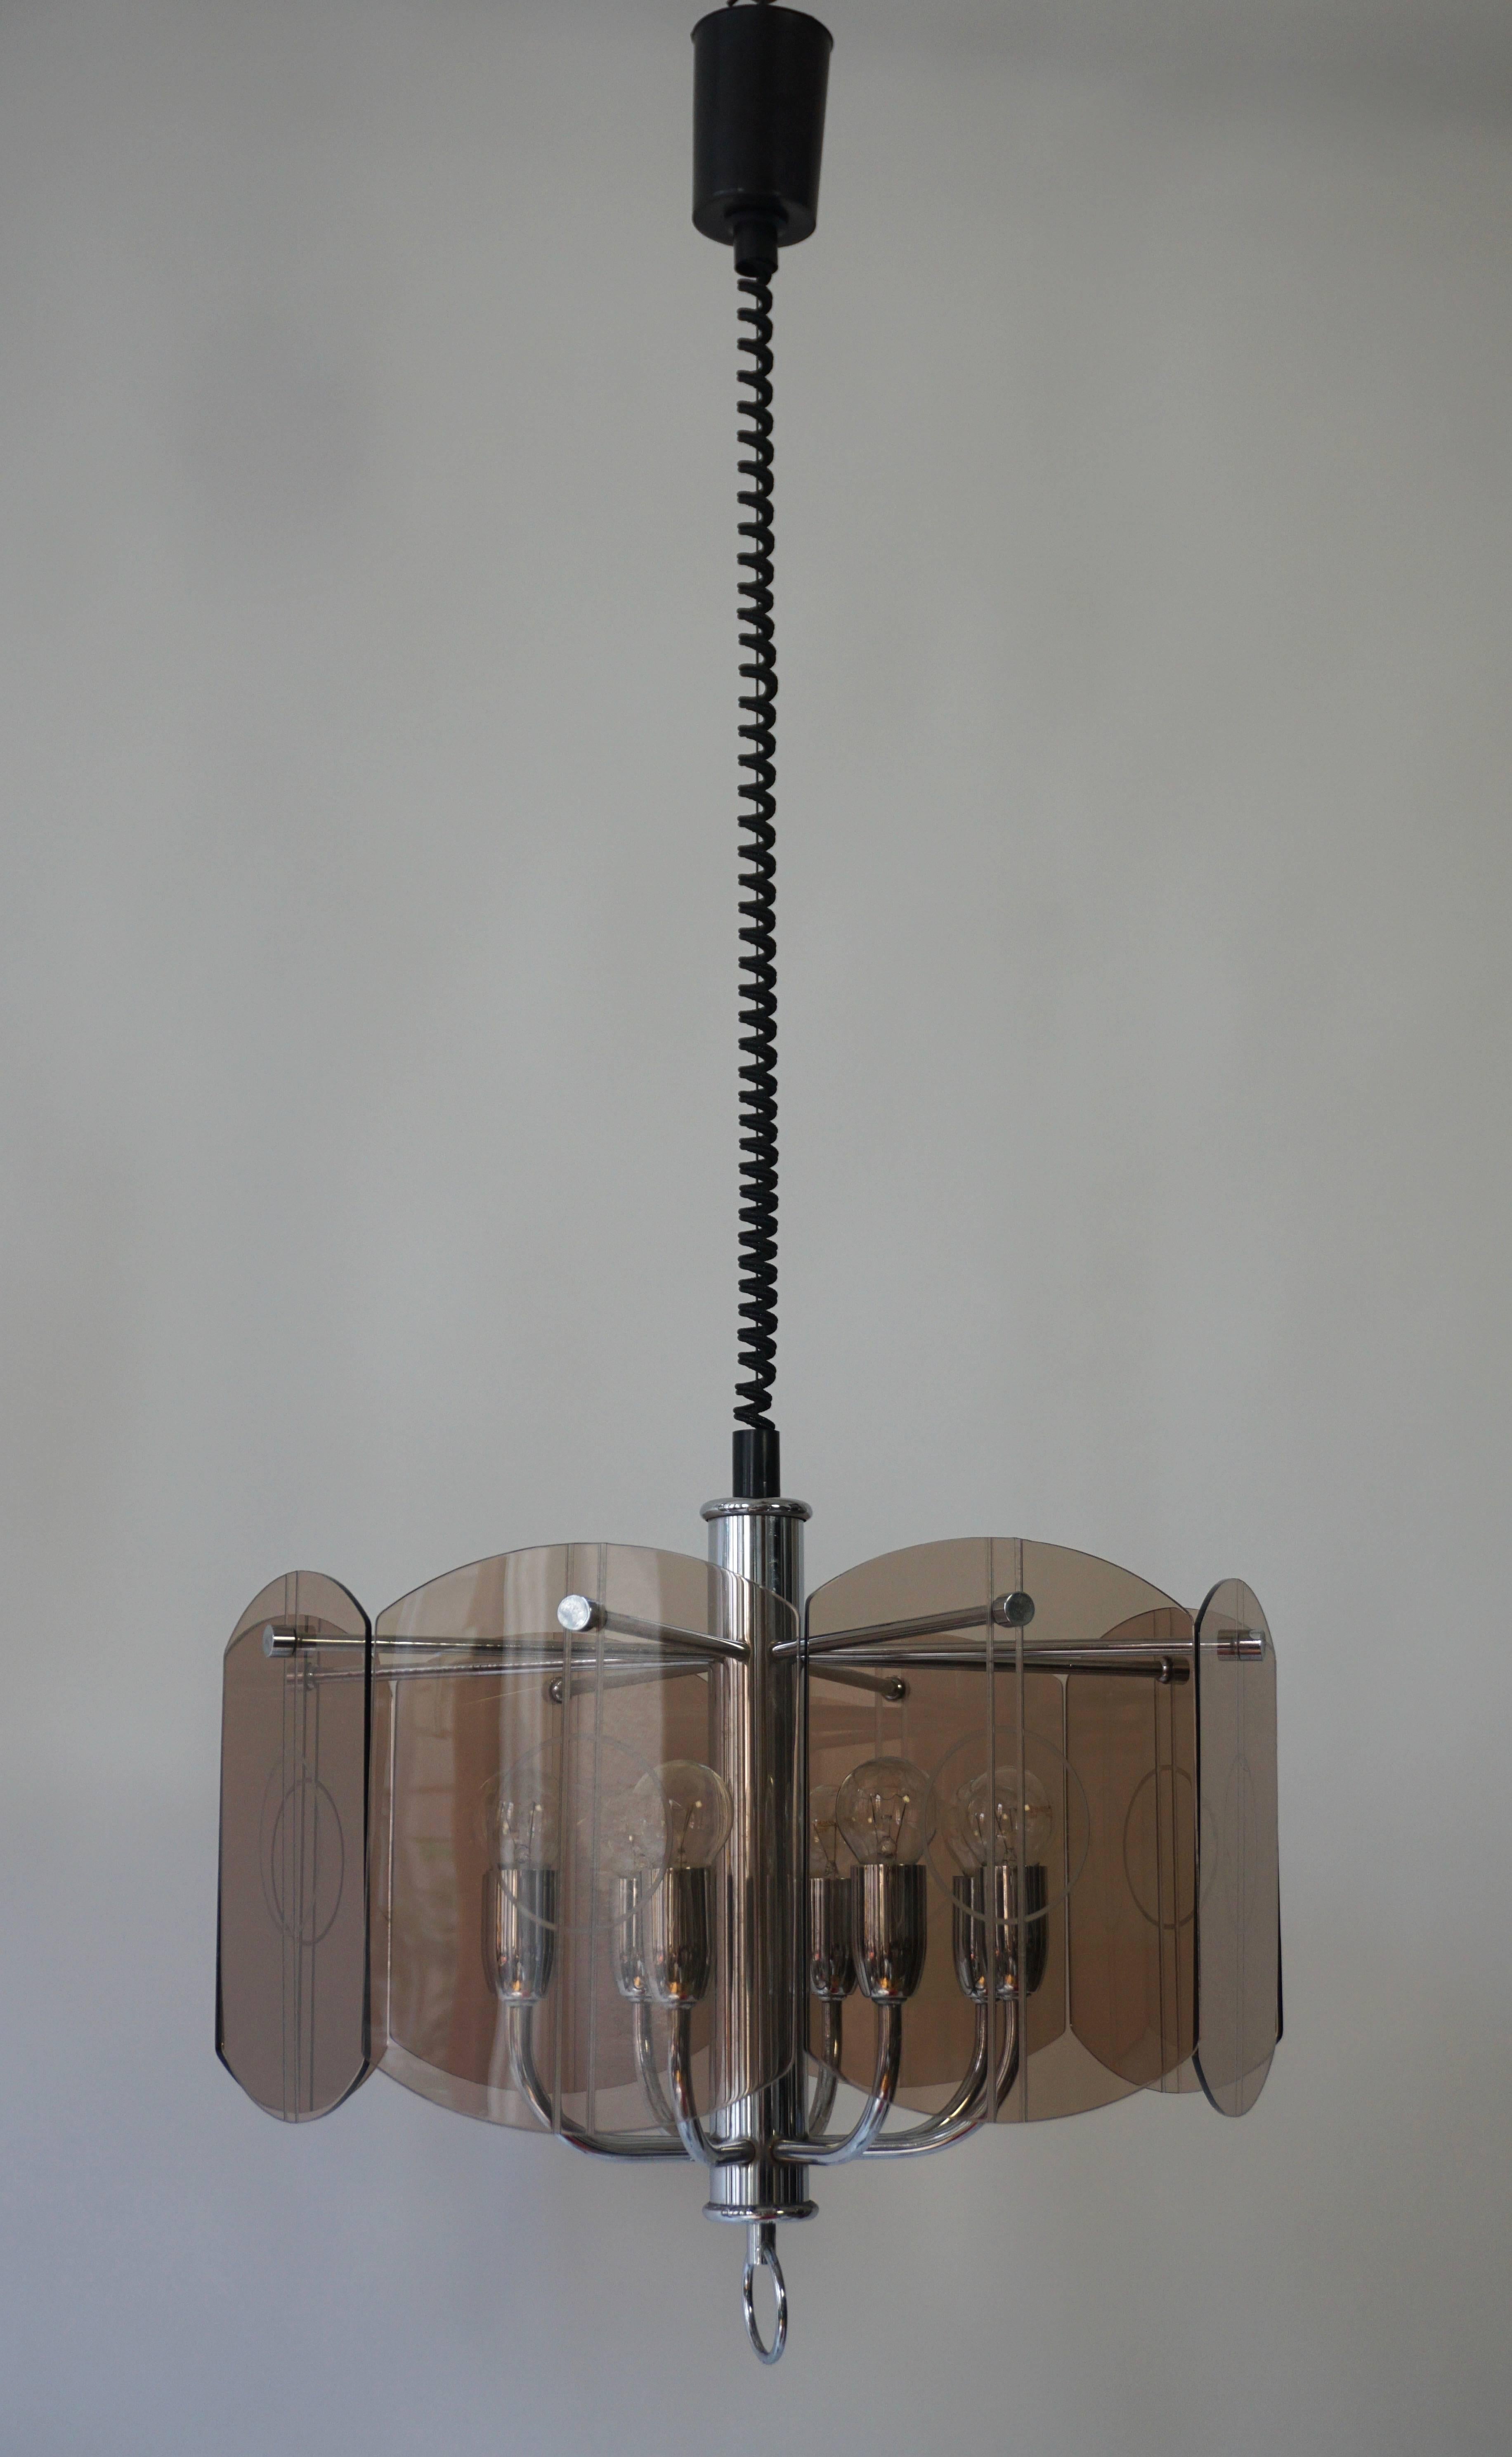 1970s pendant light.
Diameter: 47 cm.
Height: 37 cm.
Height: 110 cm cable repealed.
Height: Extended cable 160cm.